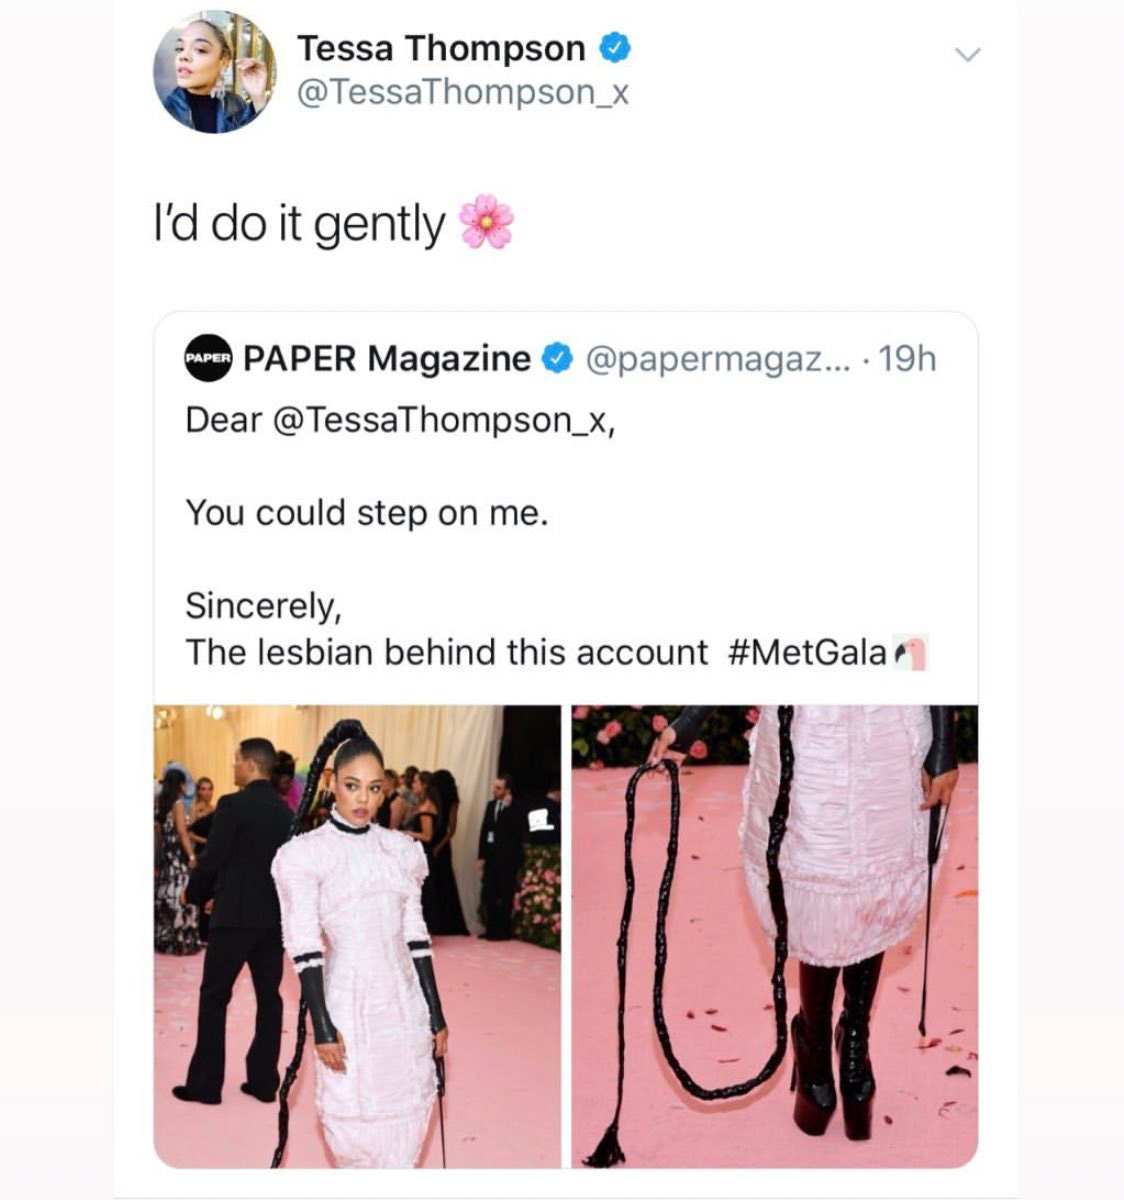 Paper Magazine tweeting that Tessa Thompson could "step on me sincerely, the lesbian behind this account" and Tessa quote tweets with "I'd do it gently"